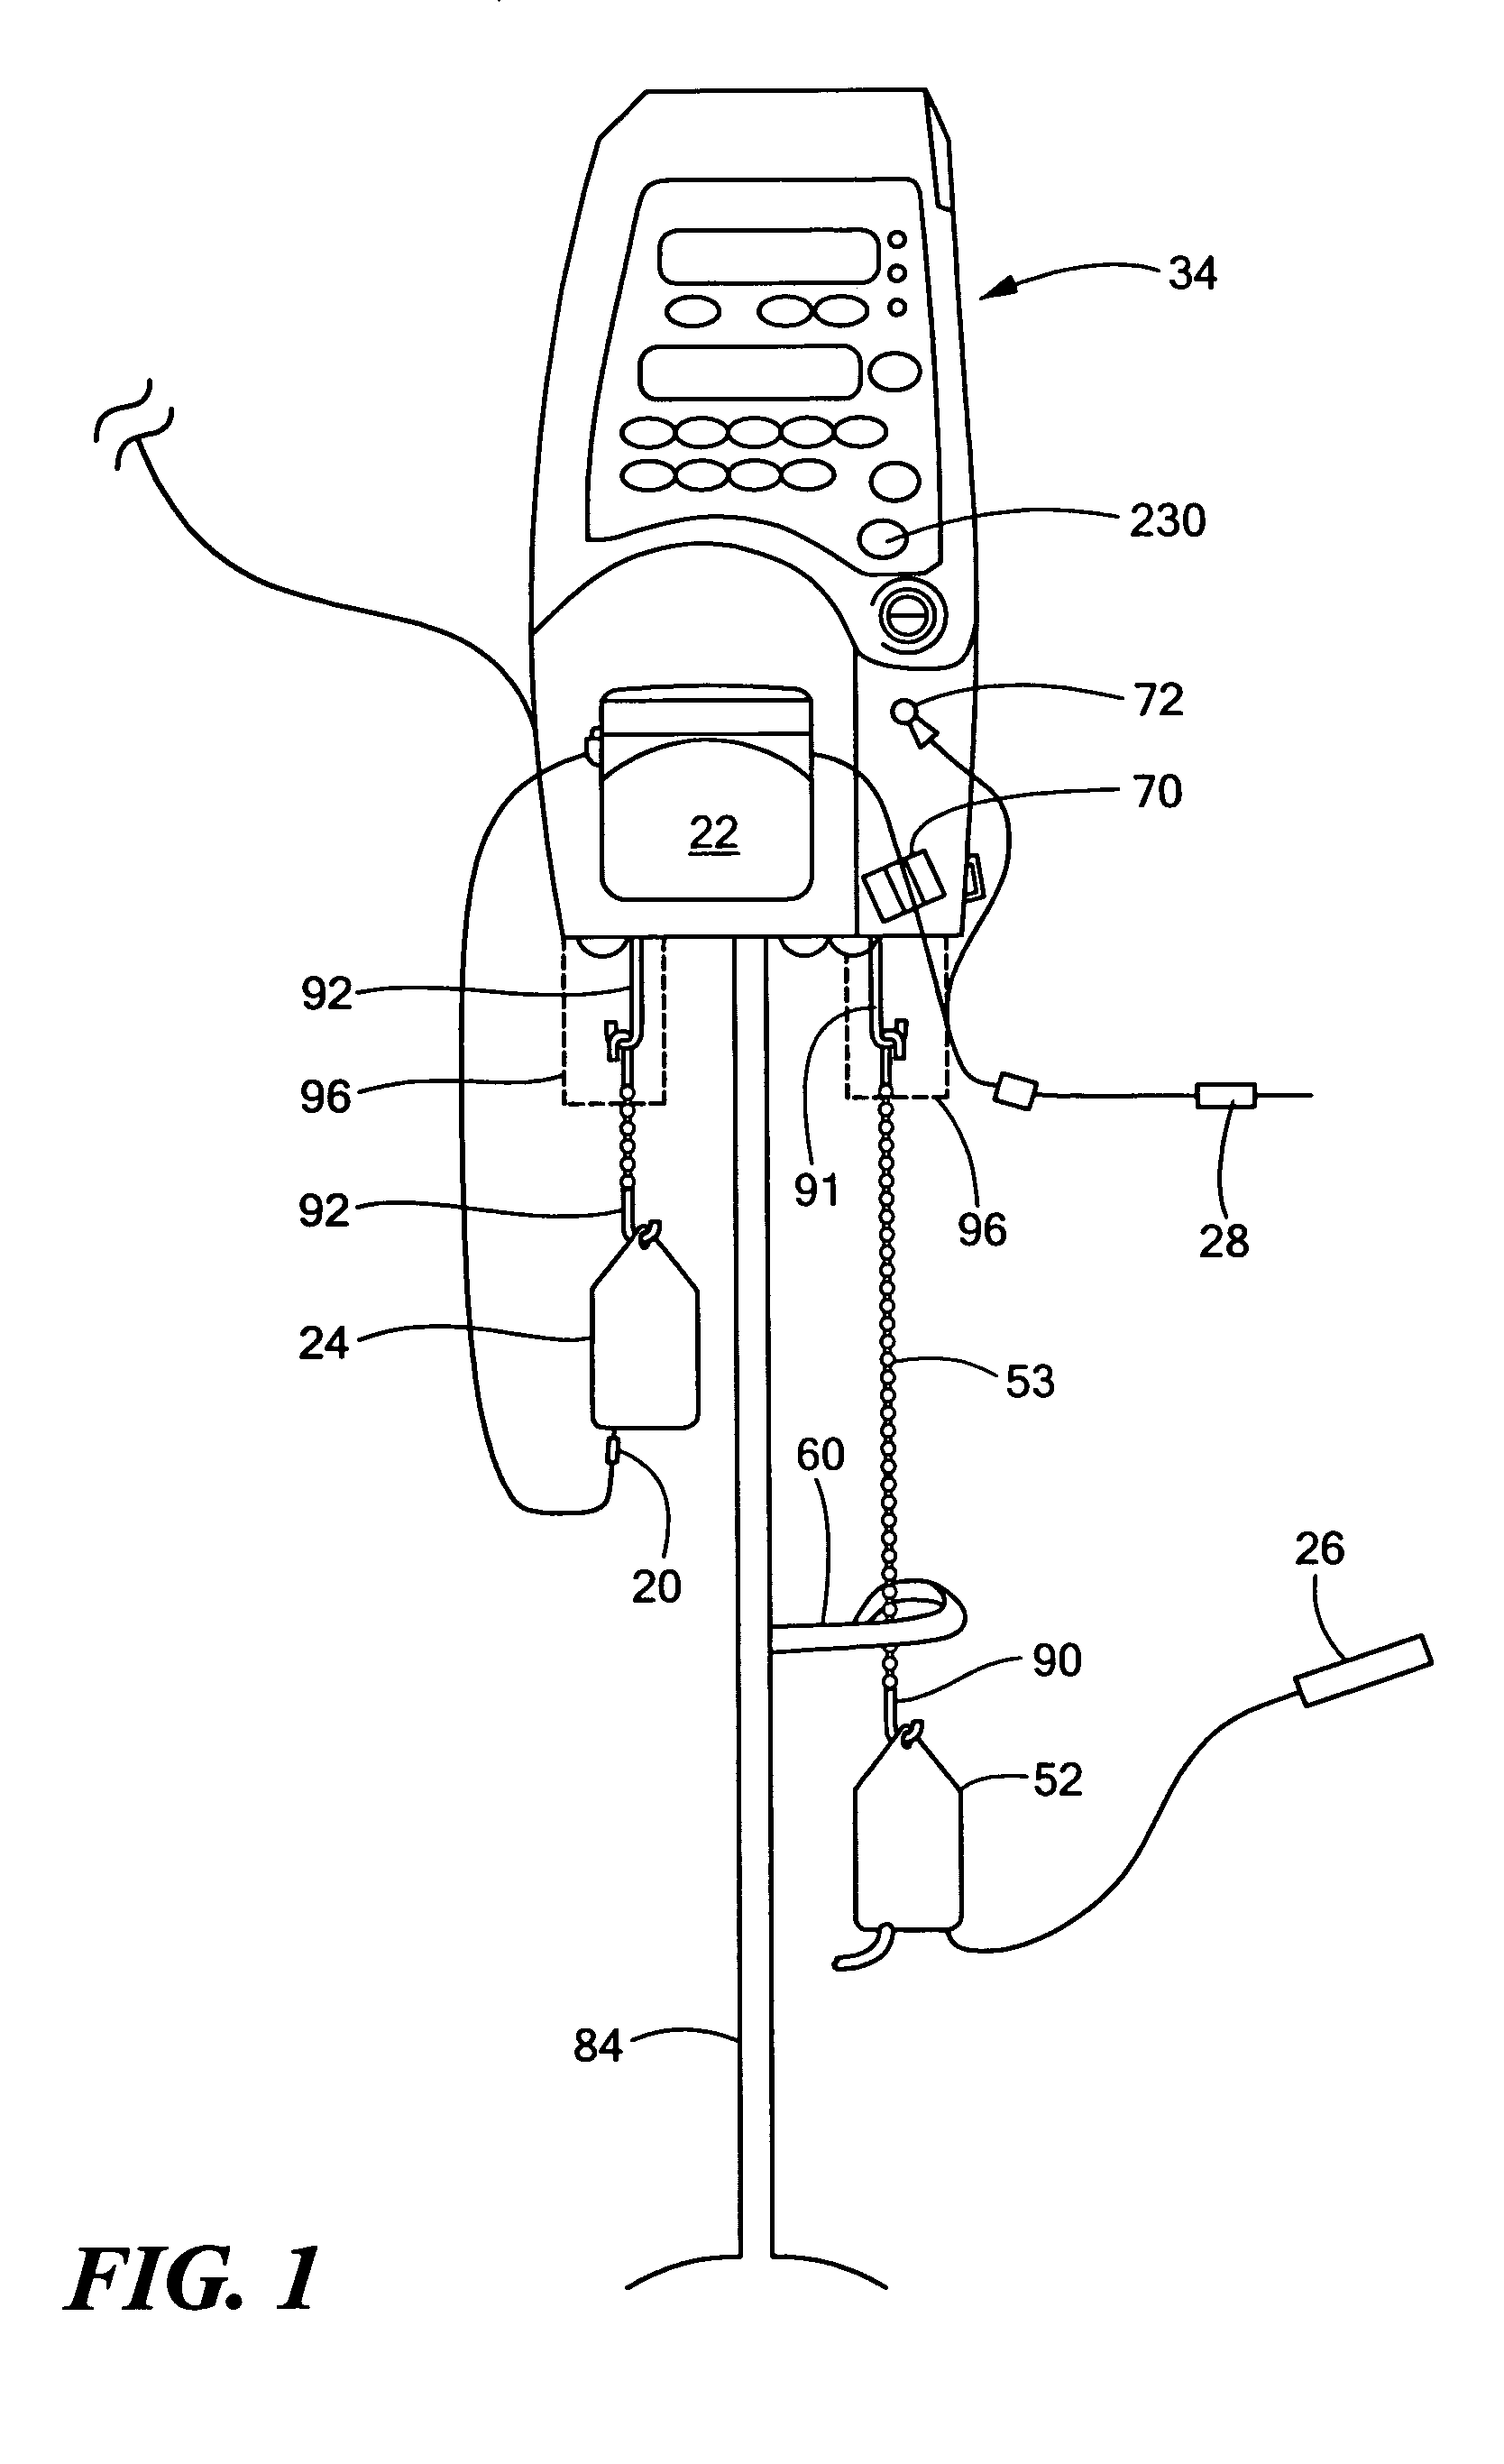 Patient hydration system with taper down feature